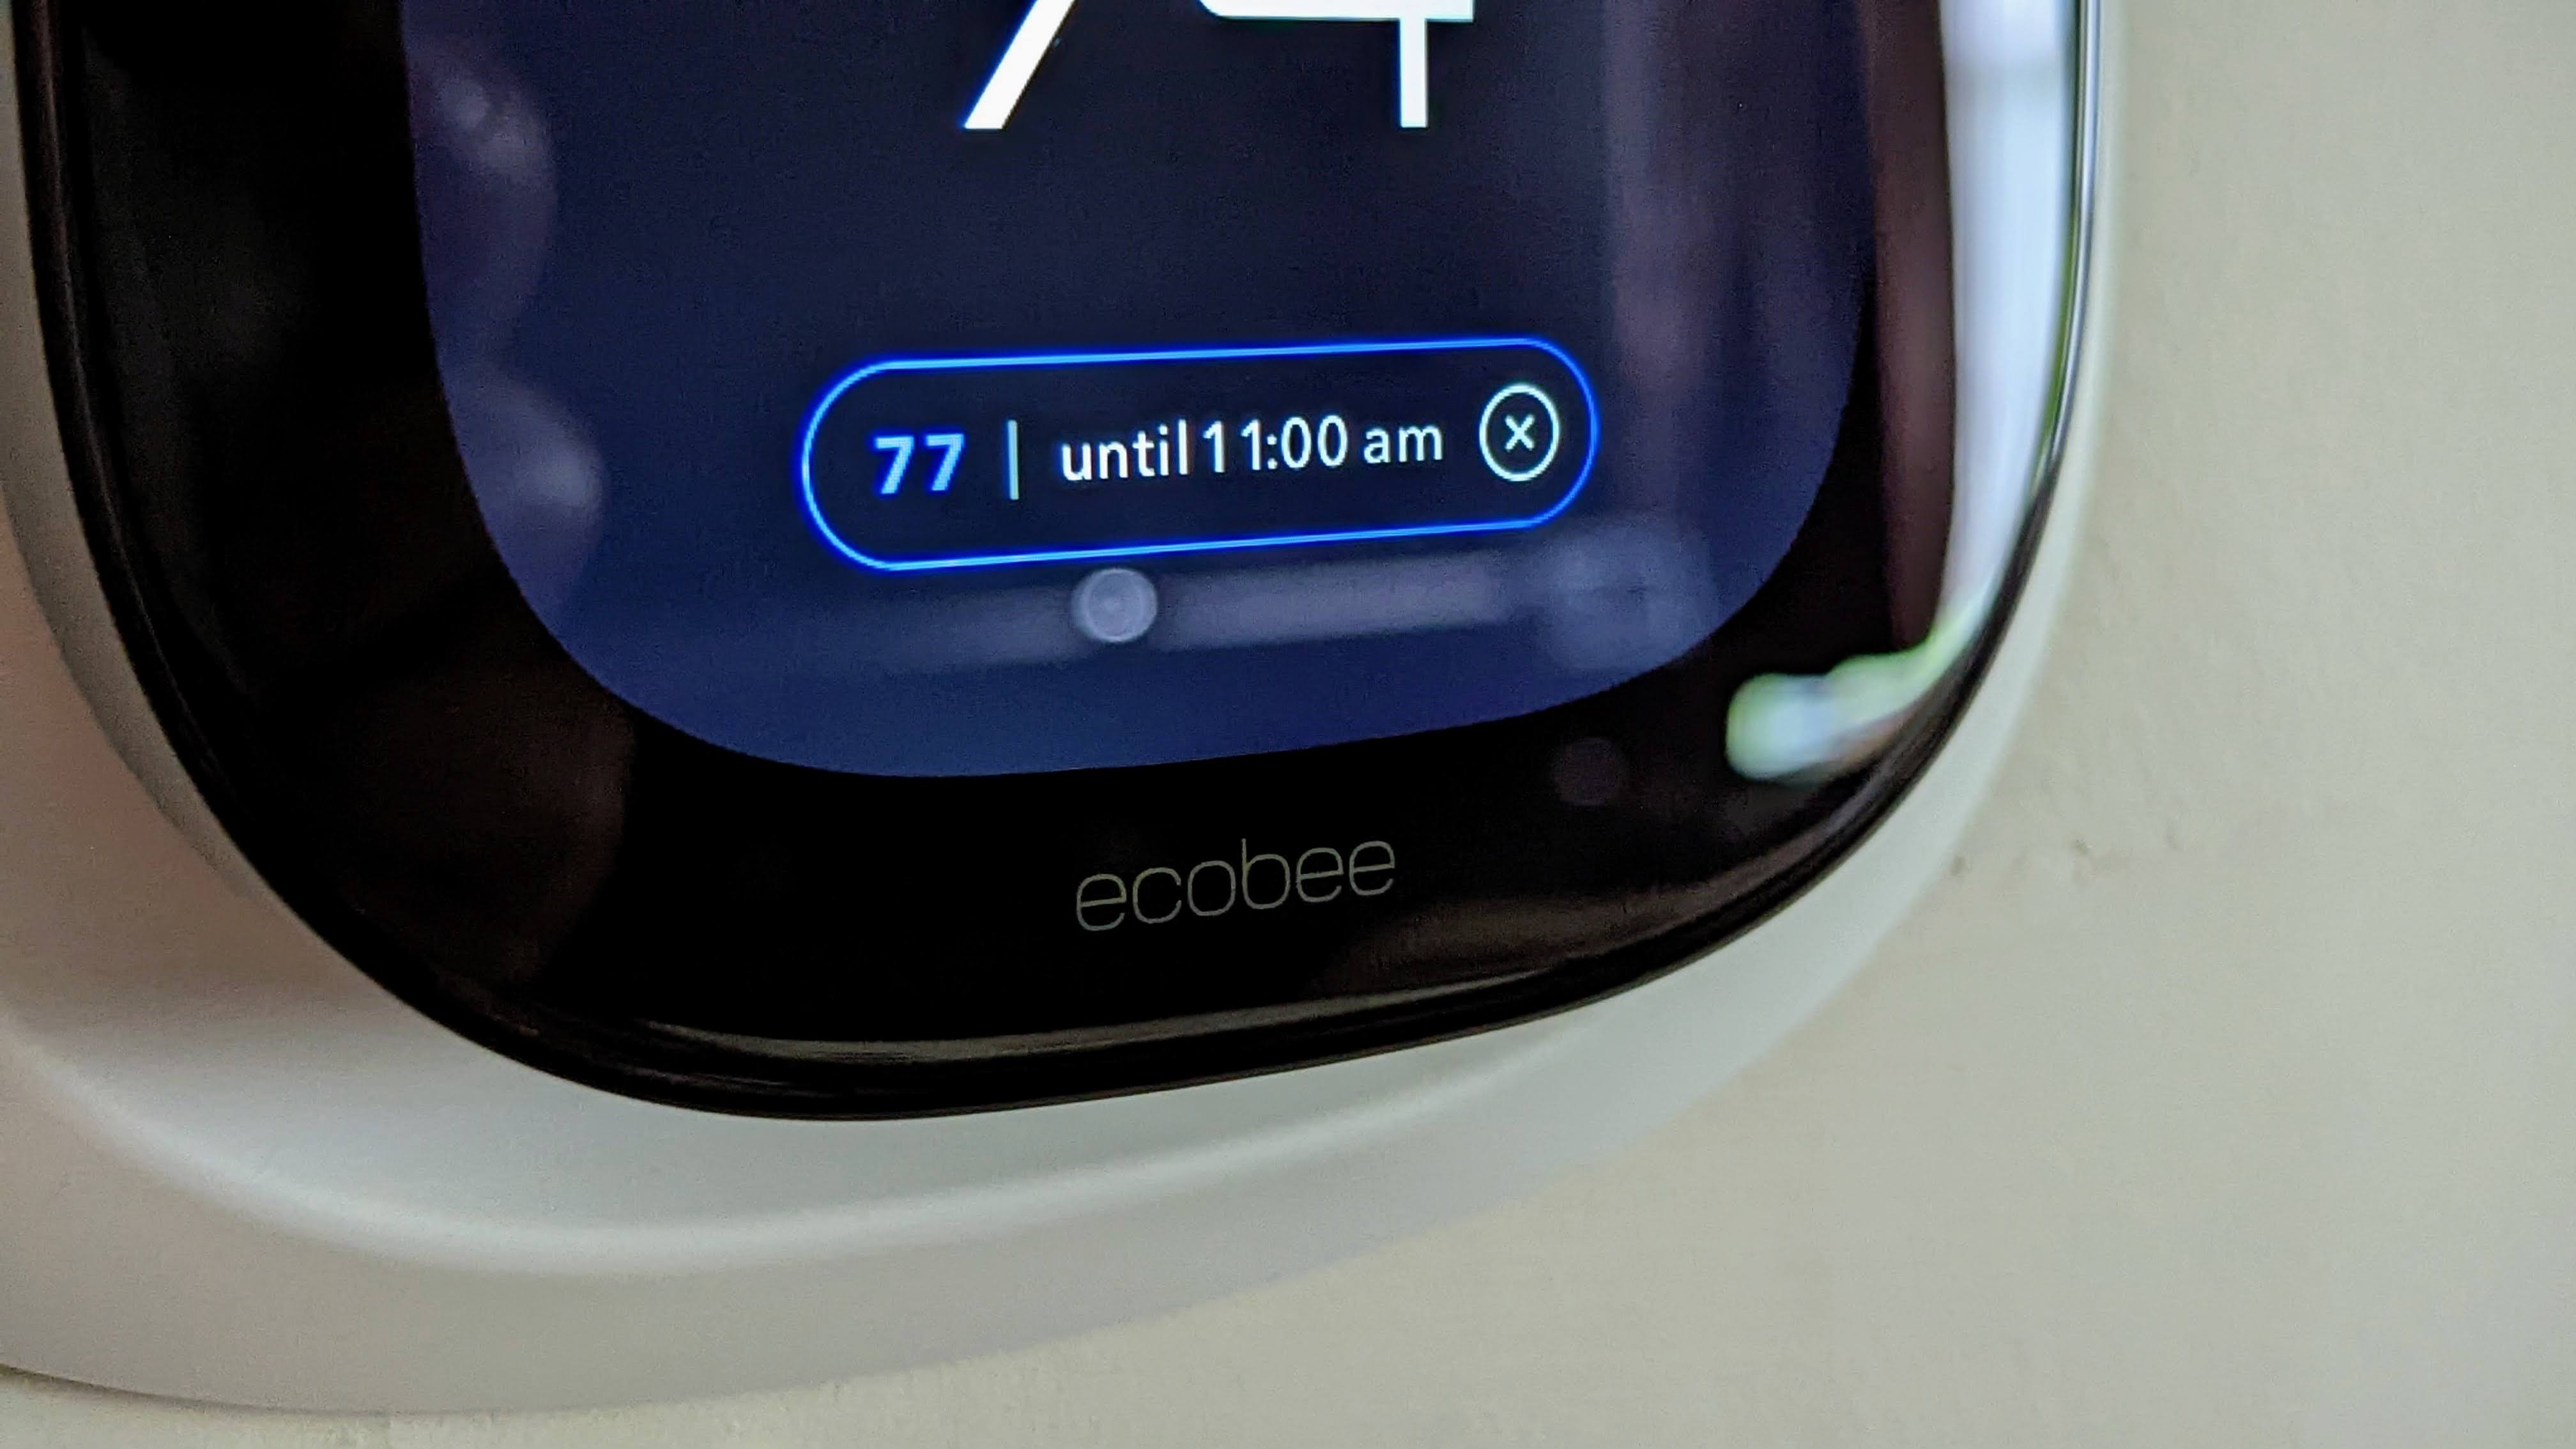 ecobee Smart Thermostat Premium review: The new gold standard in